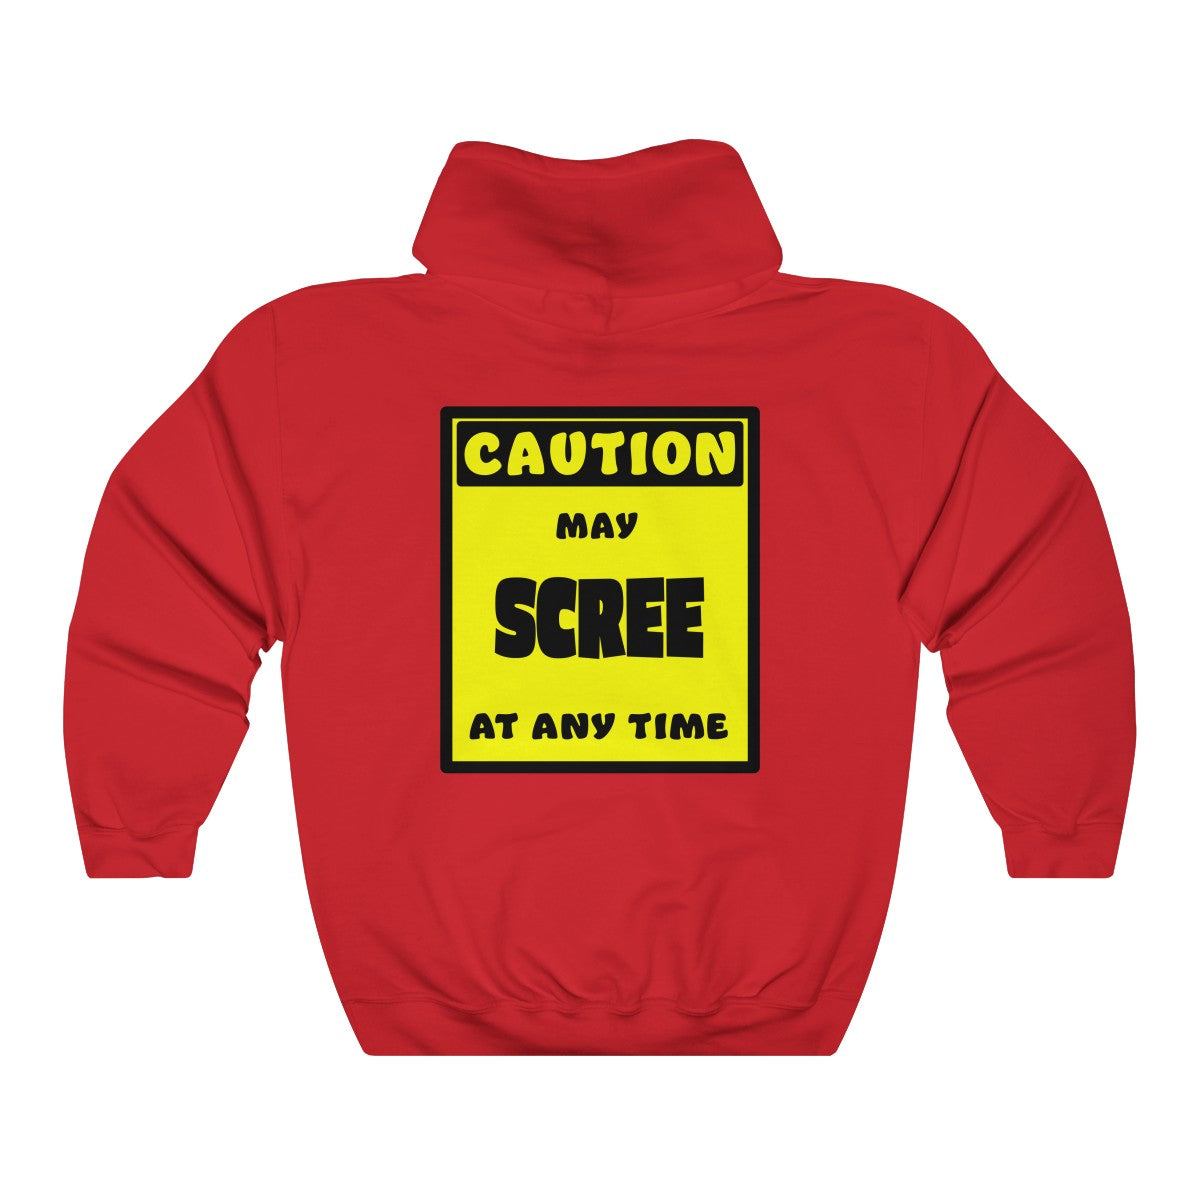 CAUTION! May SCREE at any time! - Hoodie Hoodie AFLT-Whootorca Red S 